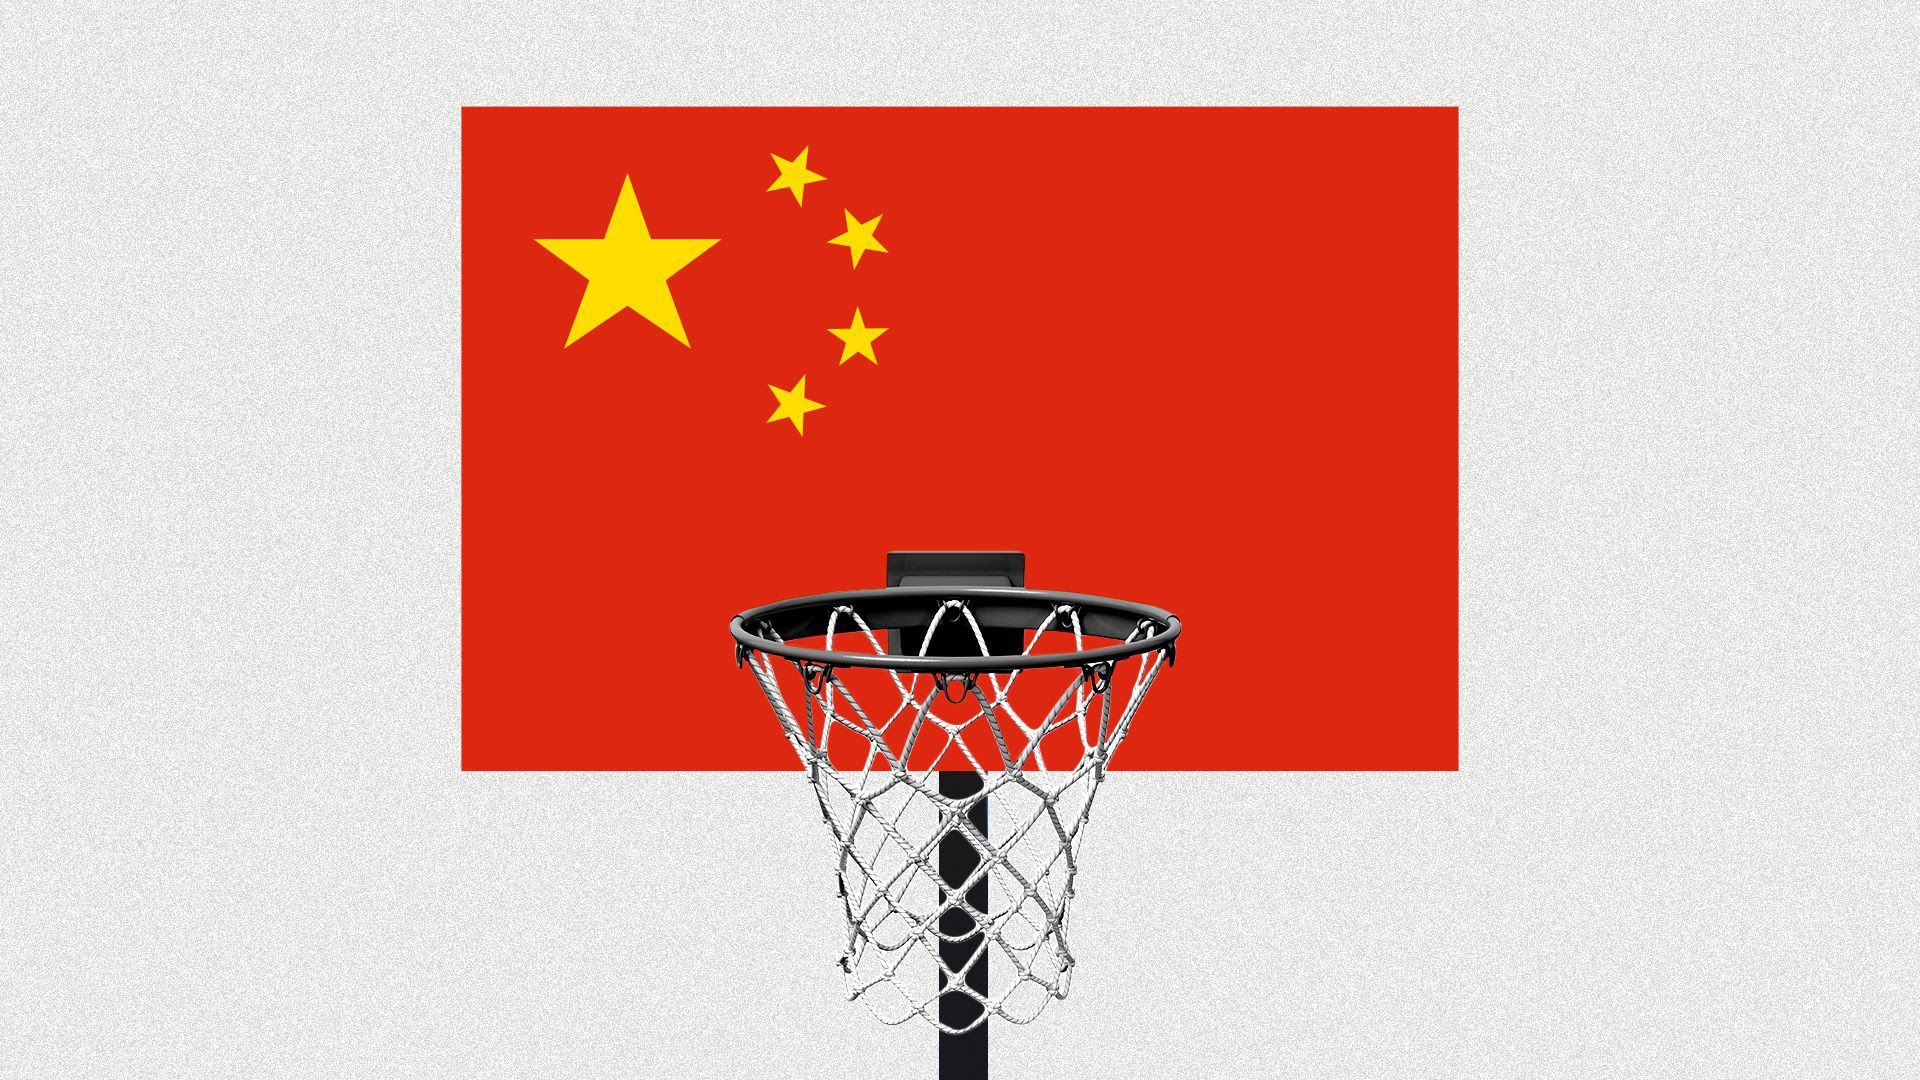 Illustration of a basketball hoop with the Chinese flag